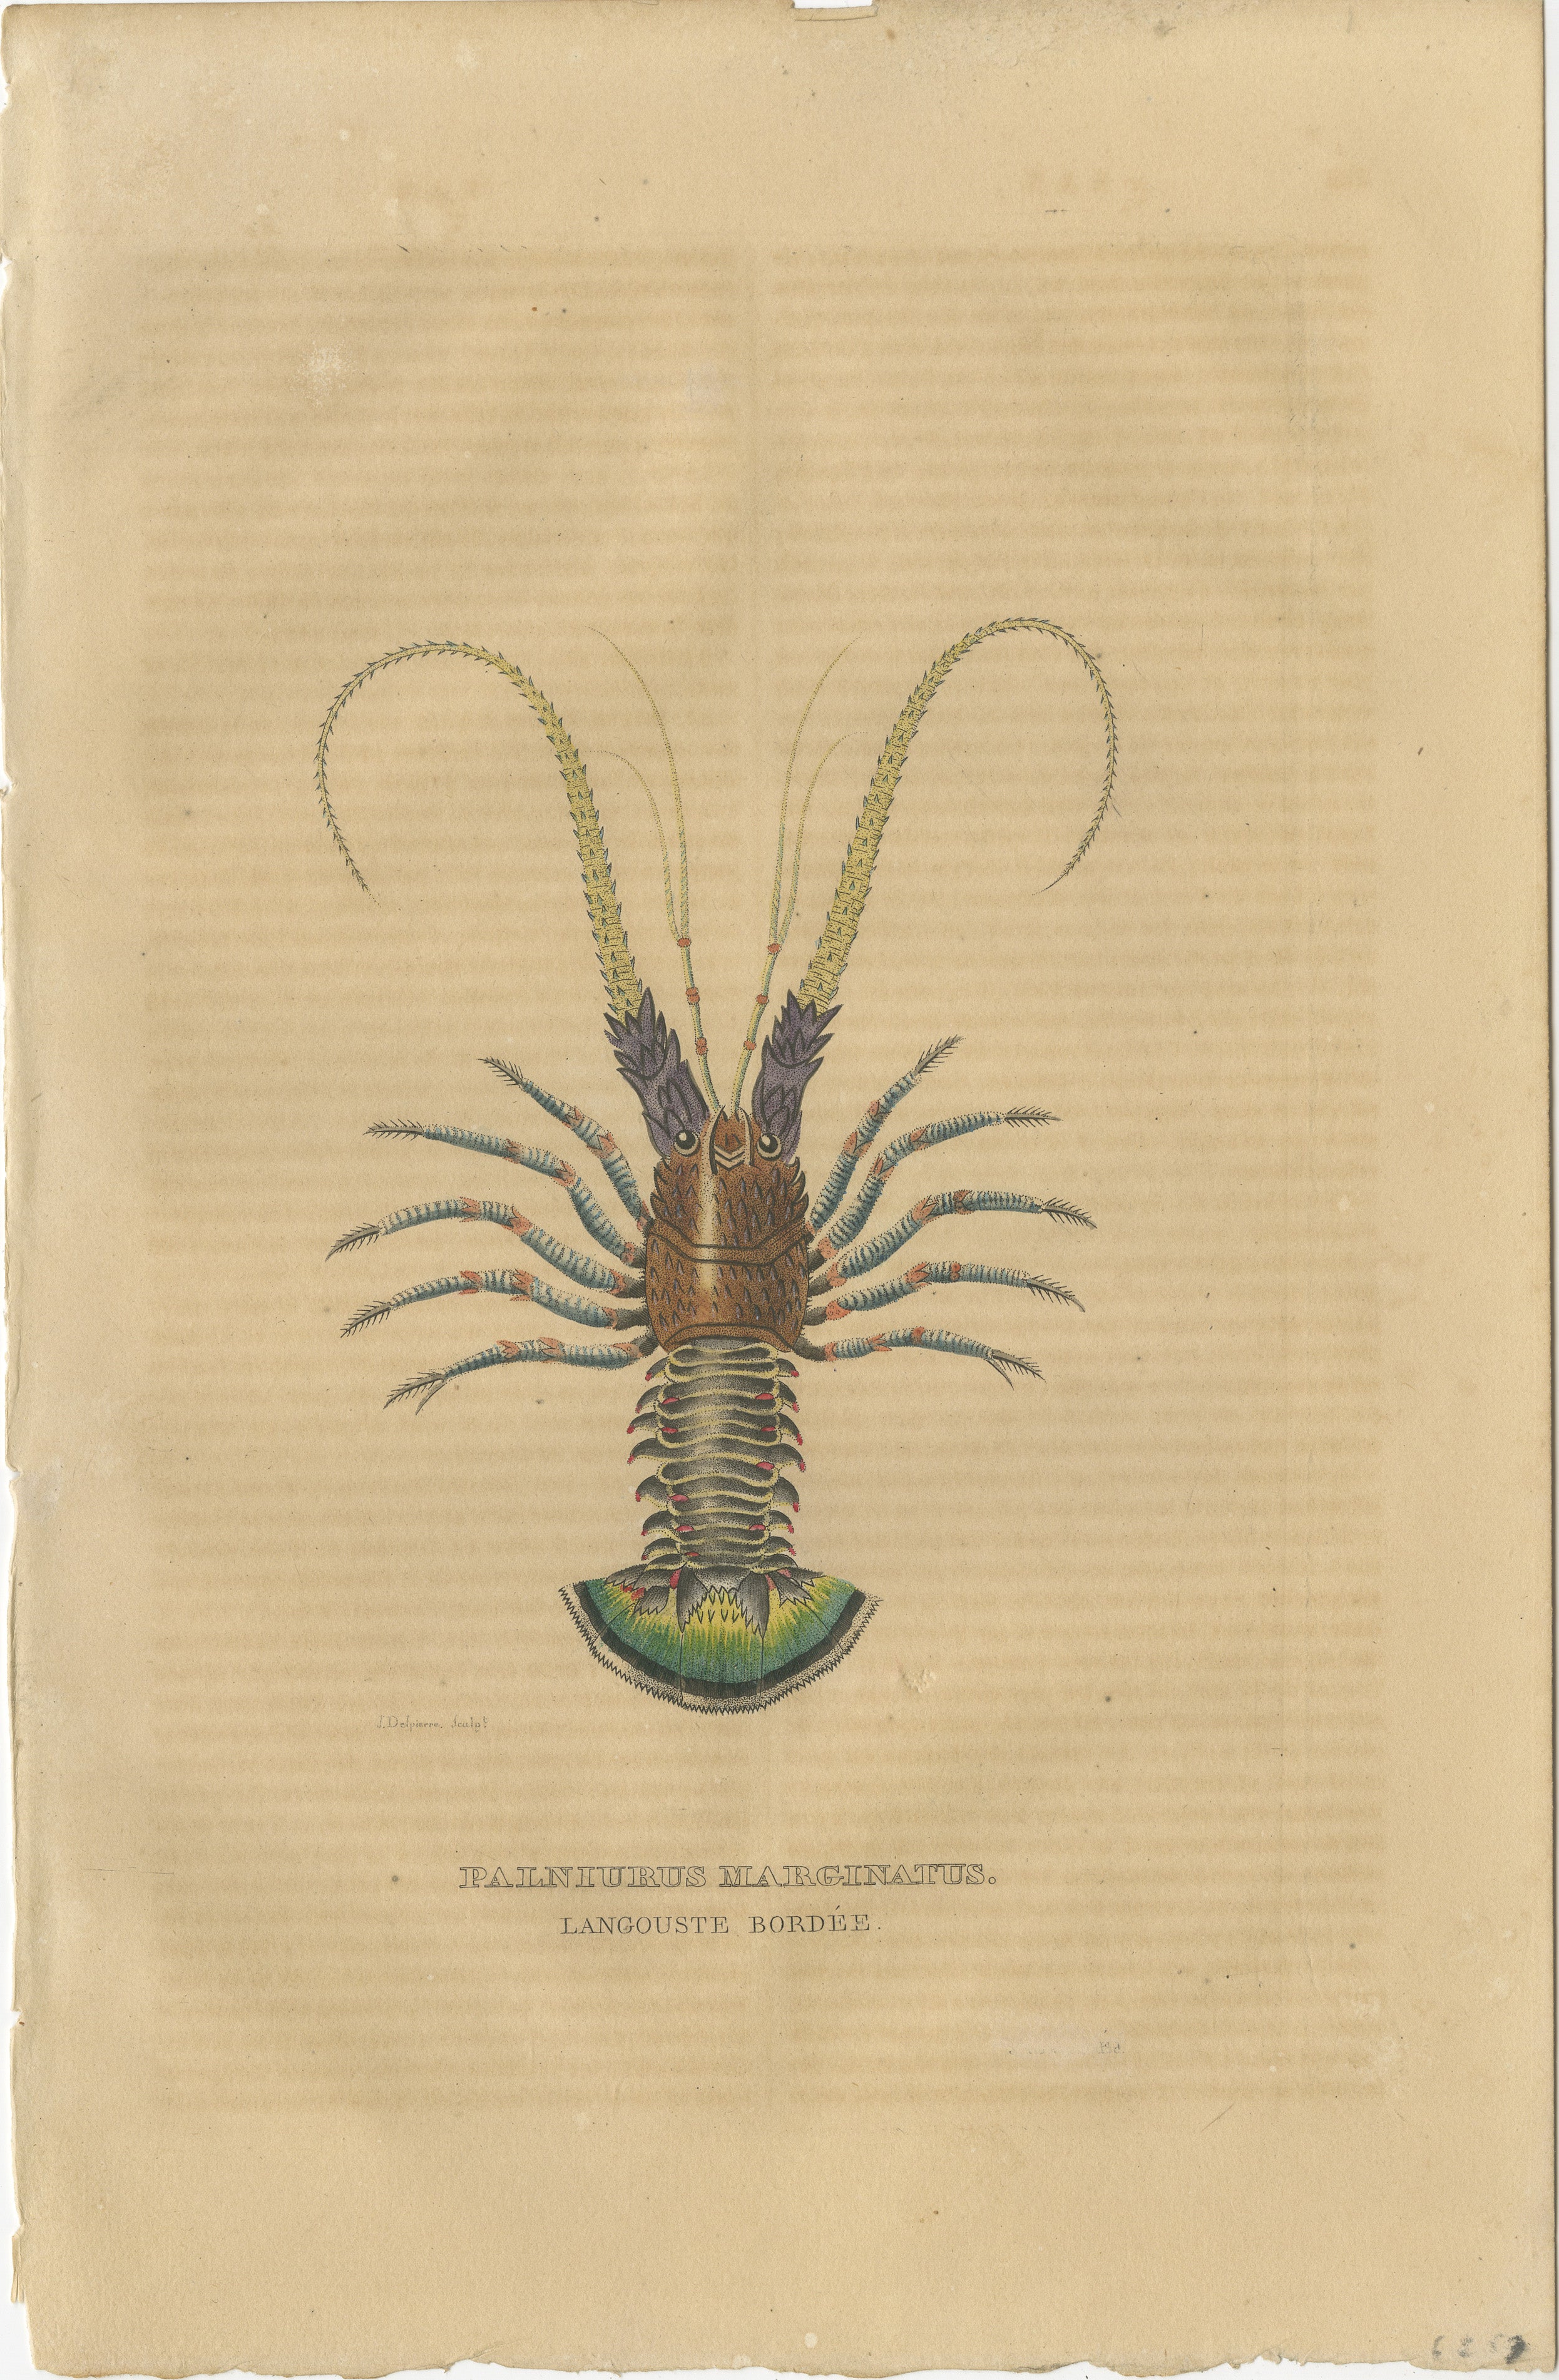 The animal in this print is the spiny lobster, specifically labeled as 